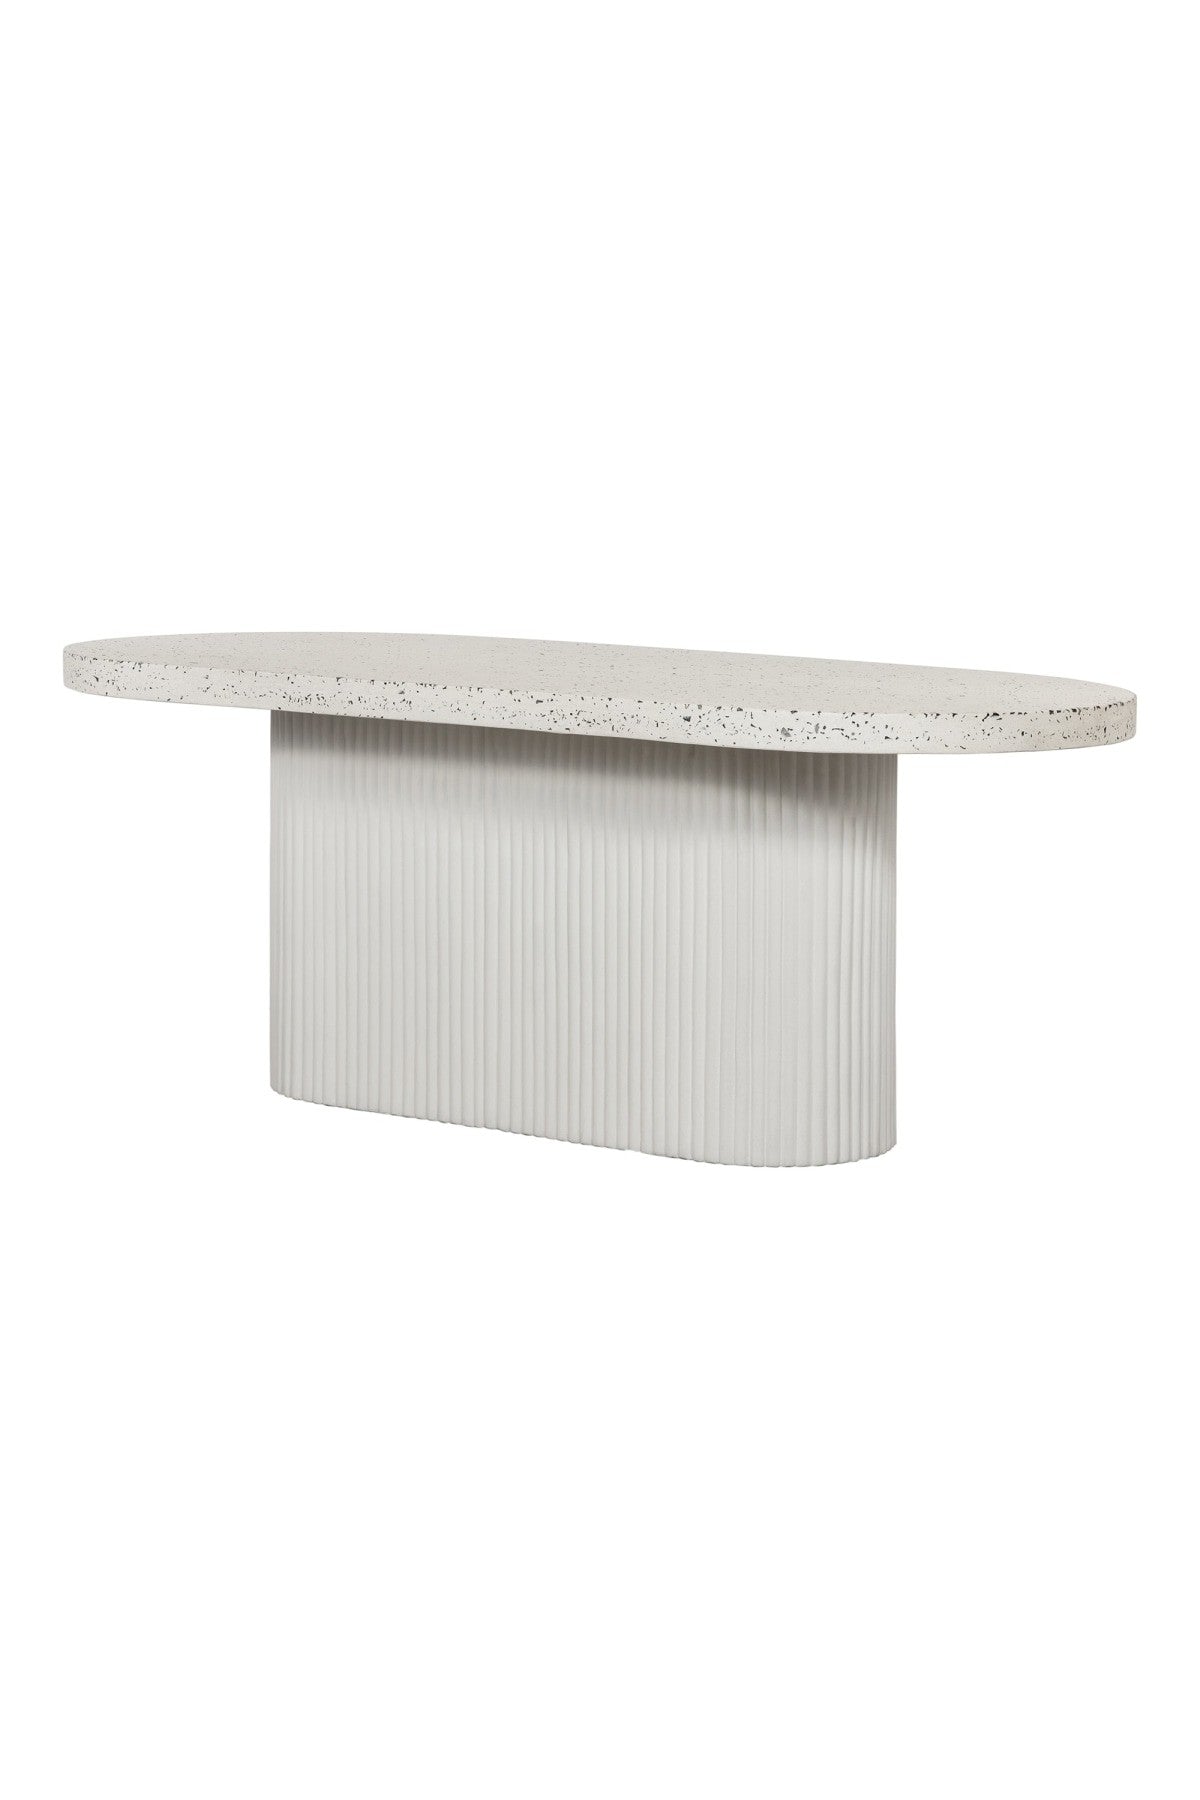 Leonie Outdoor Dining Table